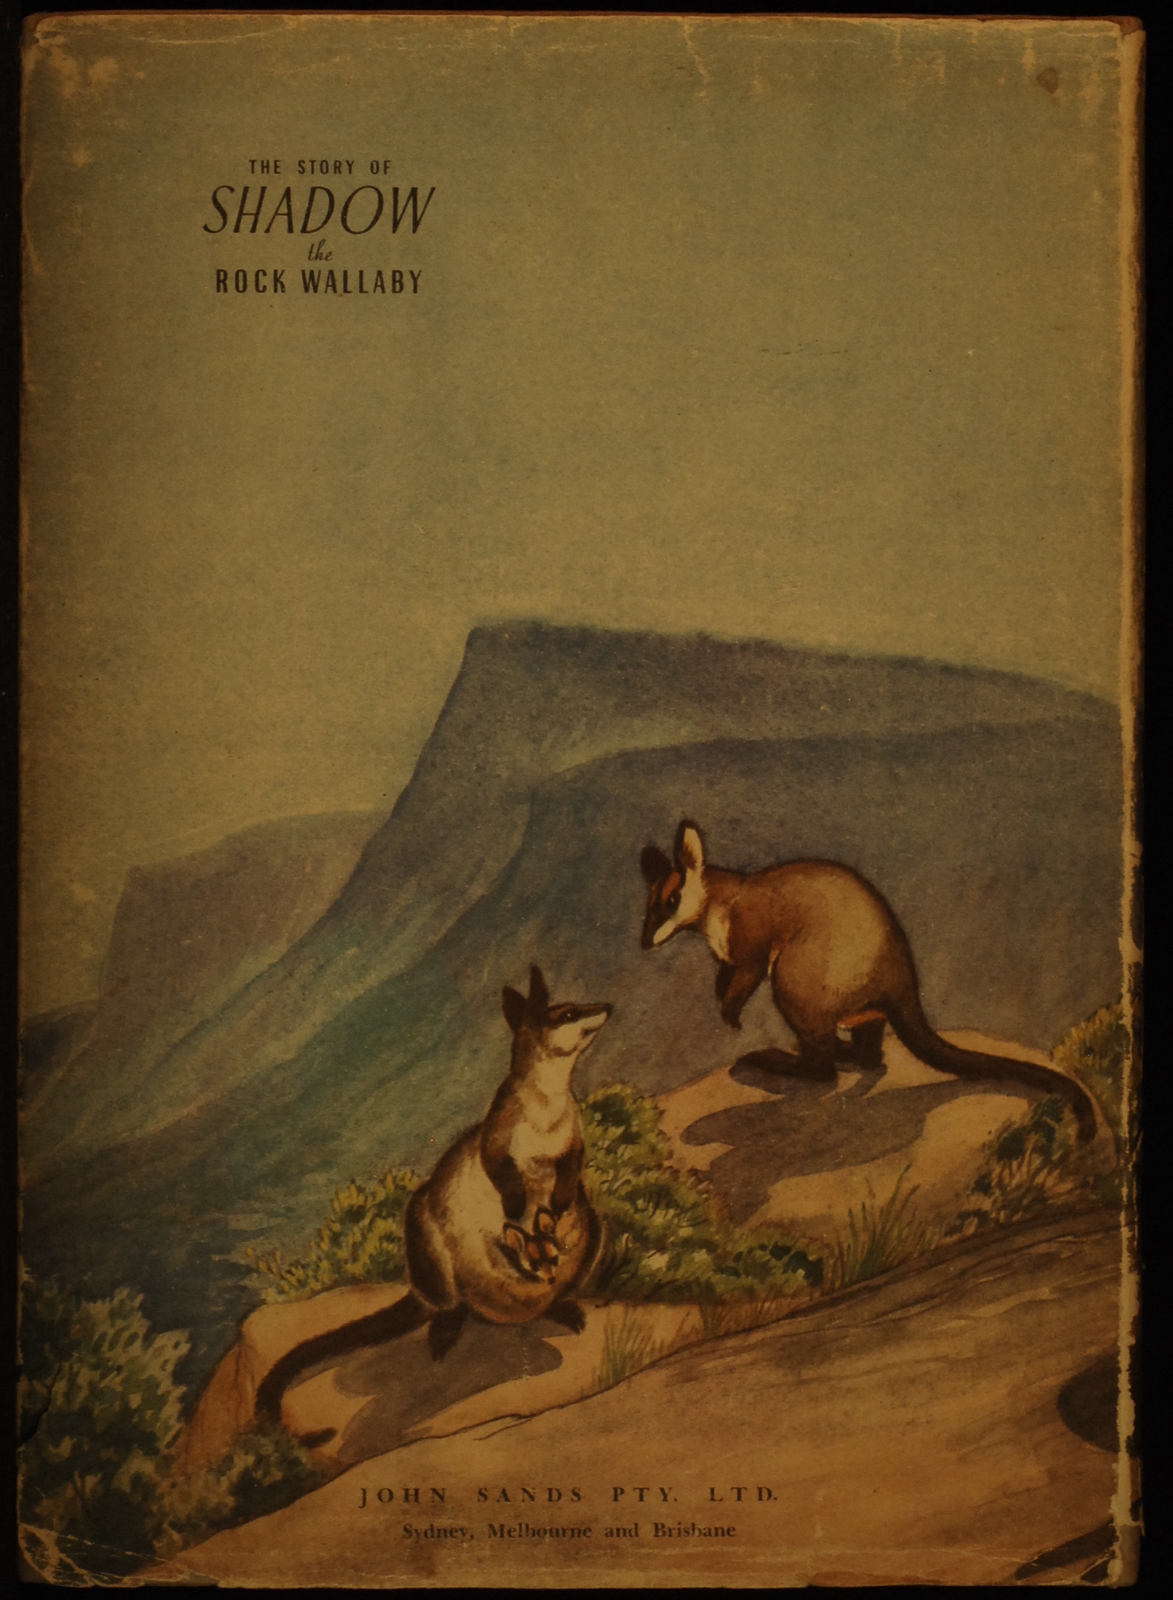 mbb006574b_-_Rees_Leslie_-_The_Story_Of_Shadow_The_Rock_Wallaby_-_WALTER_CUNNINGHAM.jpg